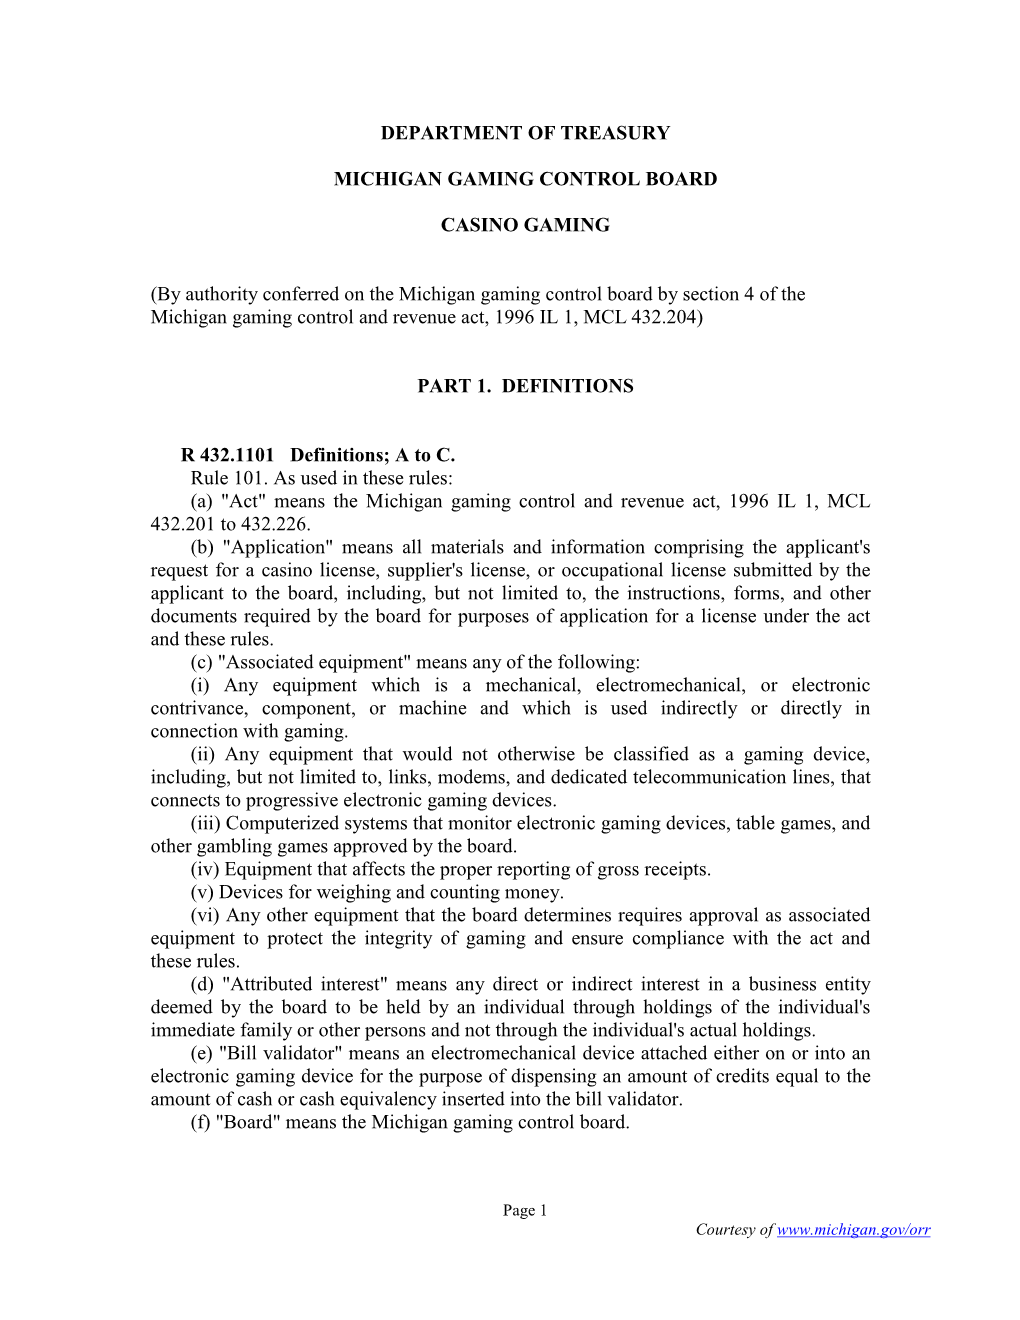 By Authority Conferred on the Michigan Gaming Control Board by Section 4 of the Michigan Gaming Control and Revenue Act, 1996 IL 1, MCL 432.204)